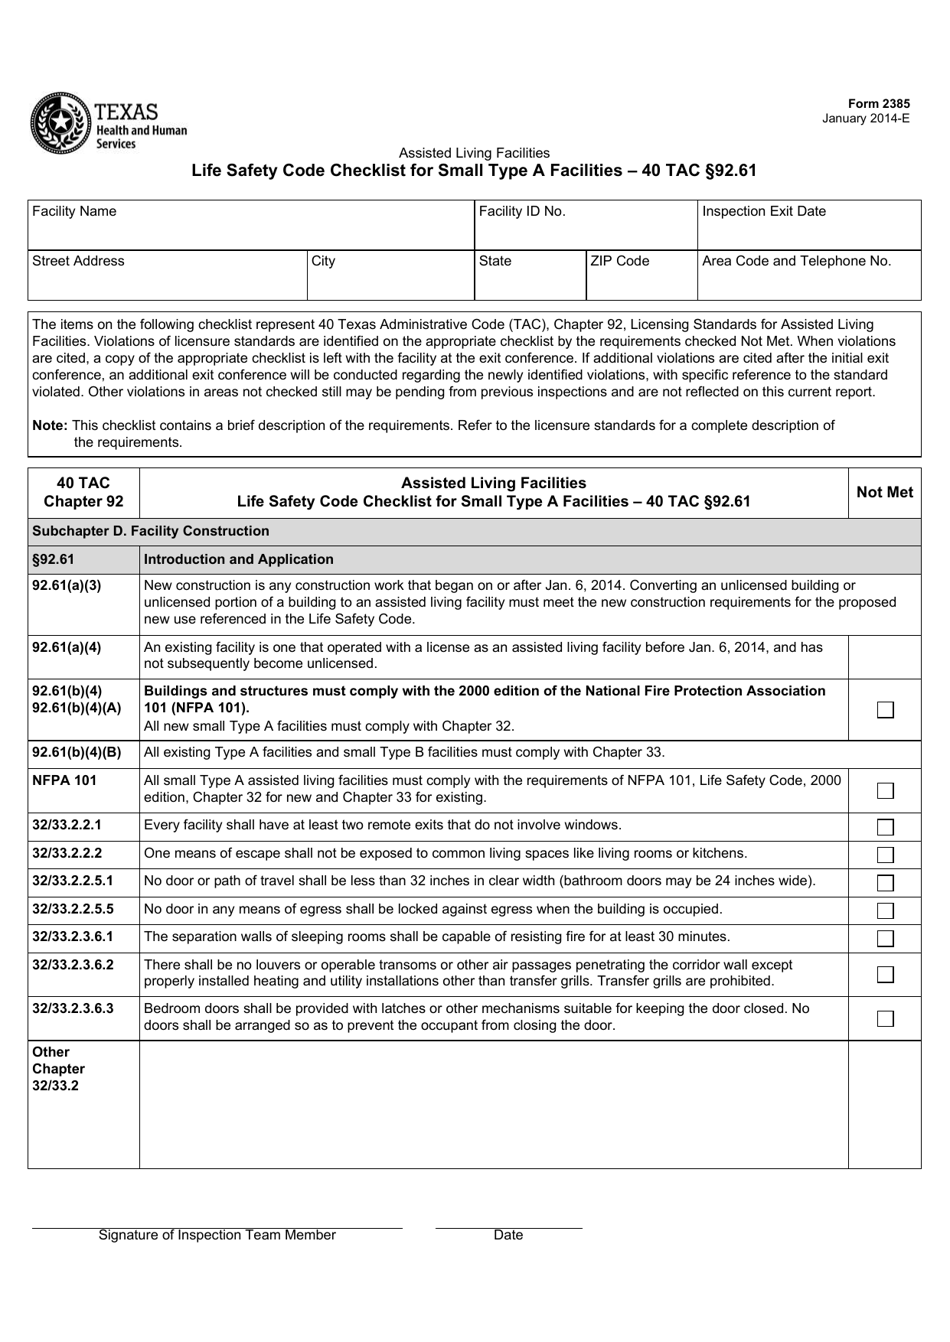 Form 2385 Life Safety Code Checklist for Small Type a Facilities - 40 Tac Section 92.61 - Texas, Page 1